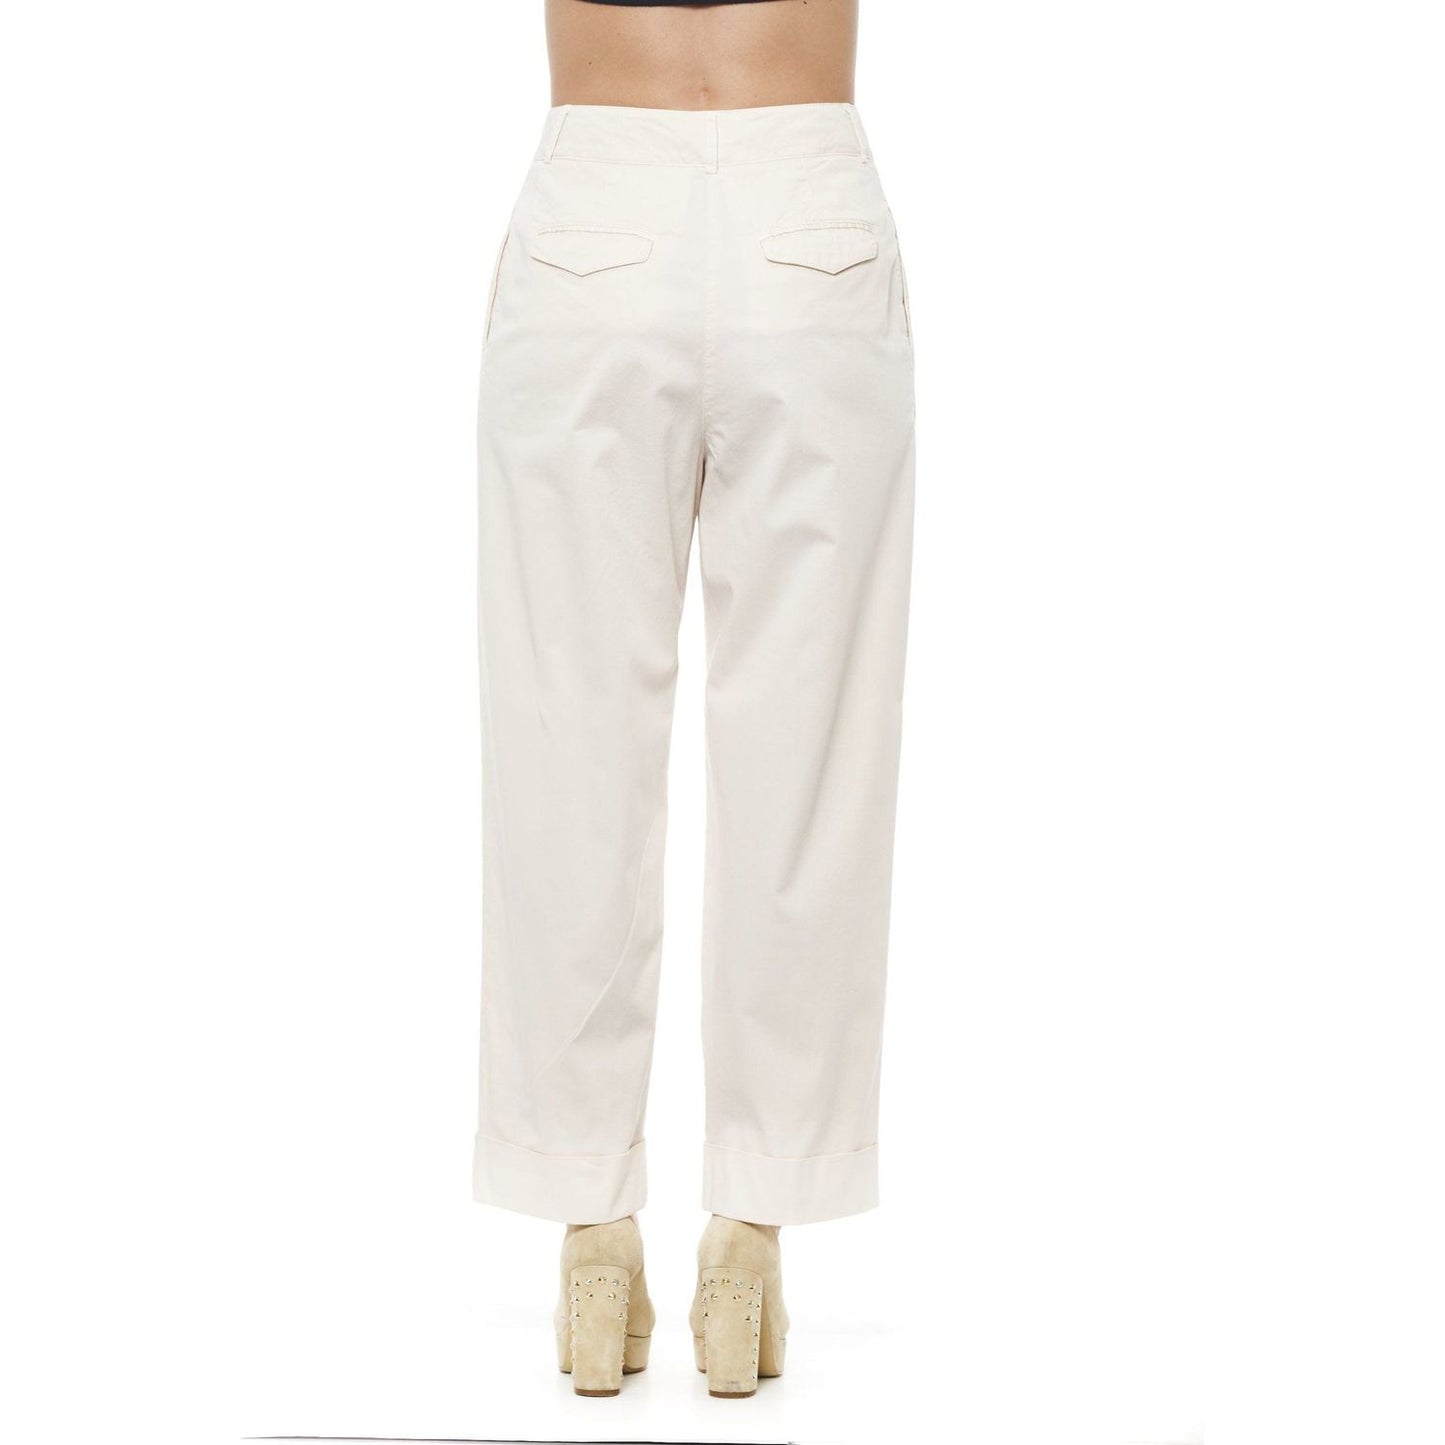 Peserico Peserico Beige Wide Palazzo Pants beige-cotton-jeans-pants stock_product_image_21243_668396181-46-scaled-cf4d35e0-eb3.jpg